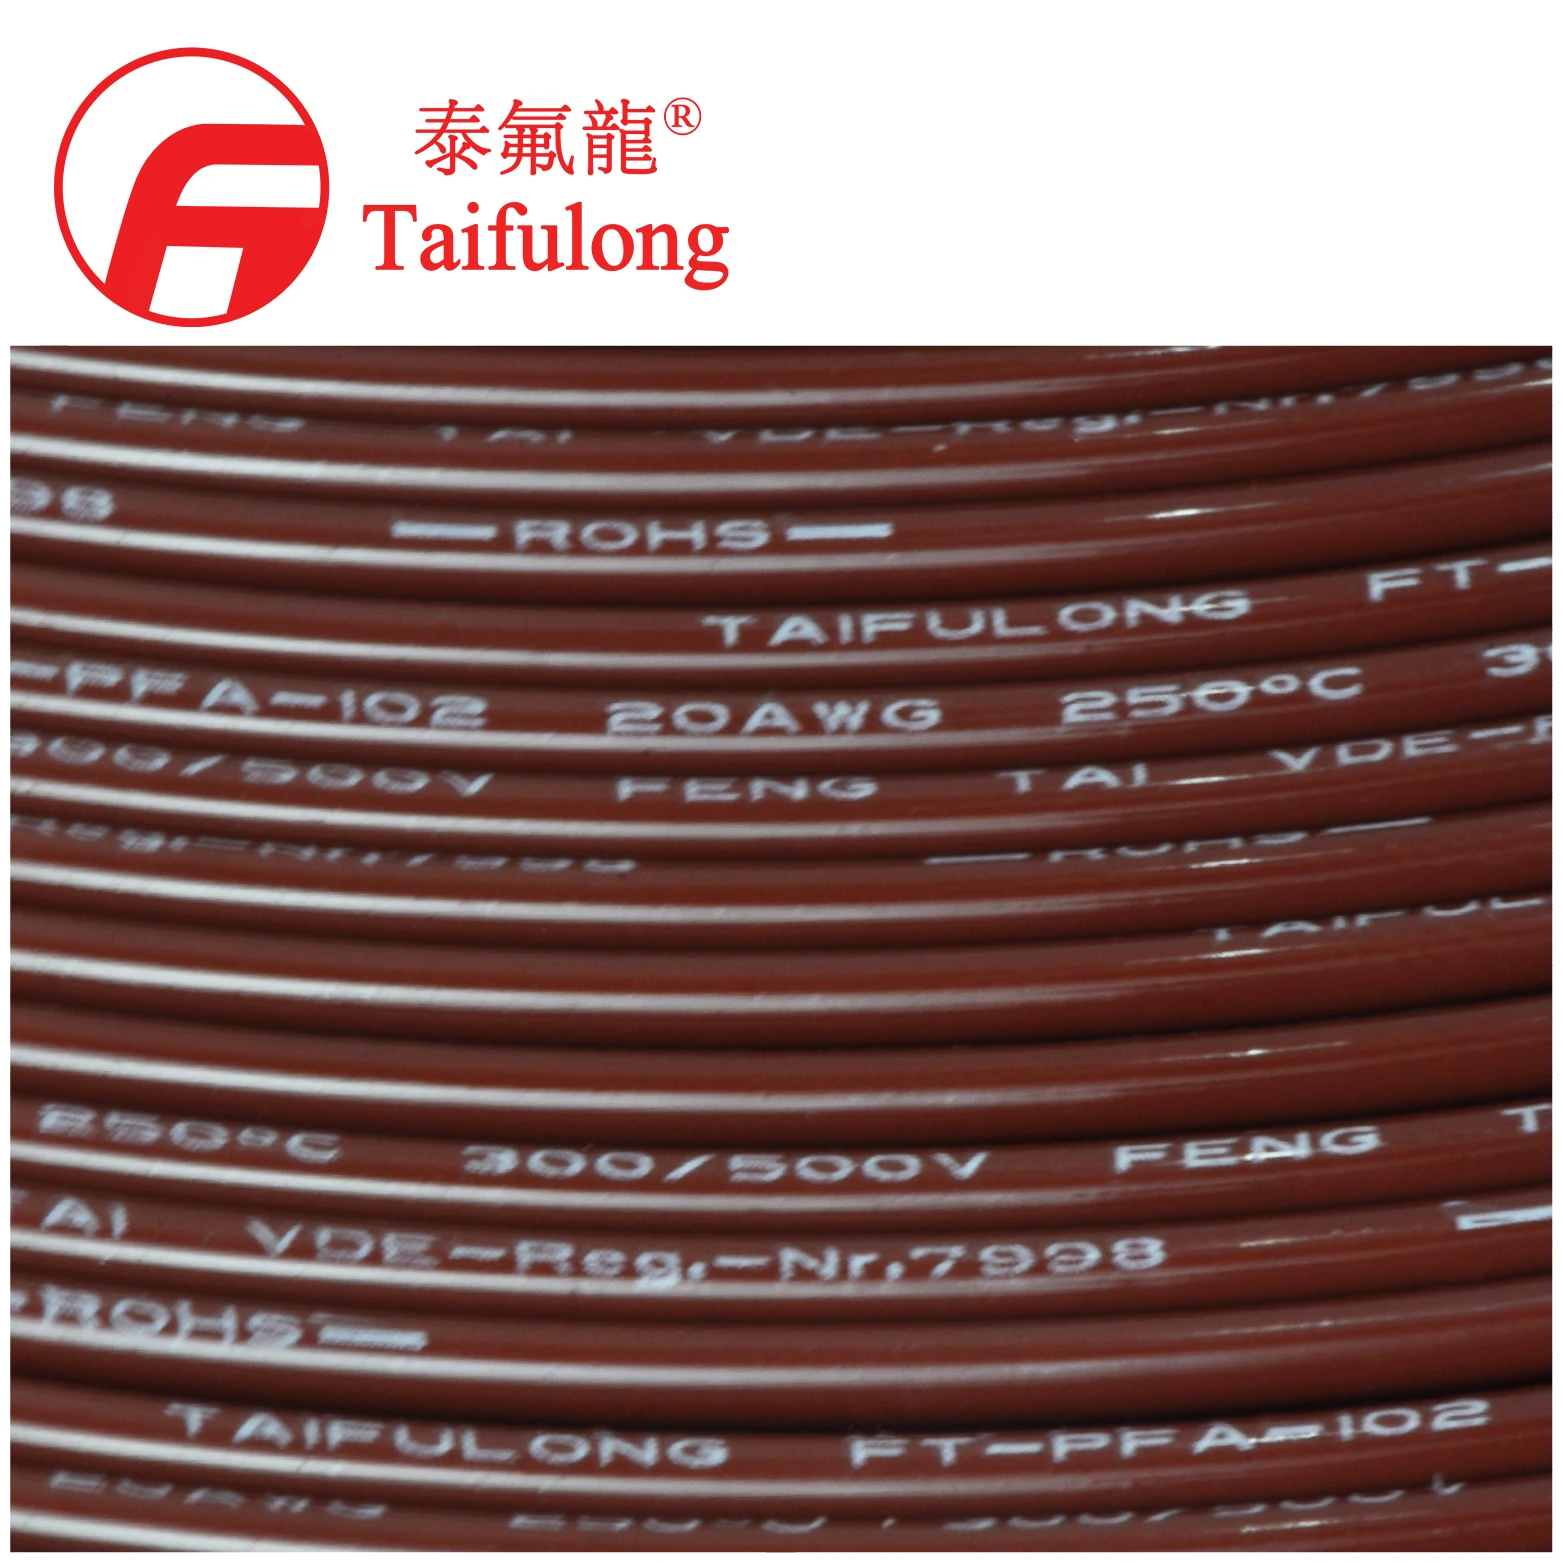 Hot sale TAIFULONG PFA  VDE7998  24AWG 250C 300/500V Tinned copper wire Electric wire manufacturer cable